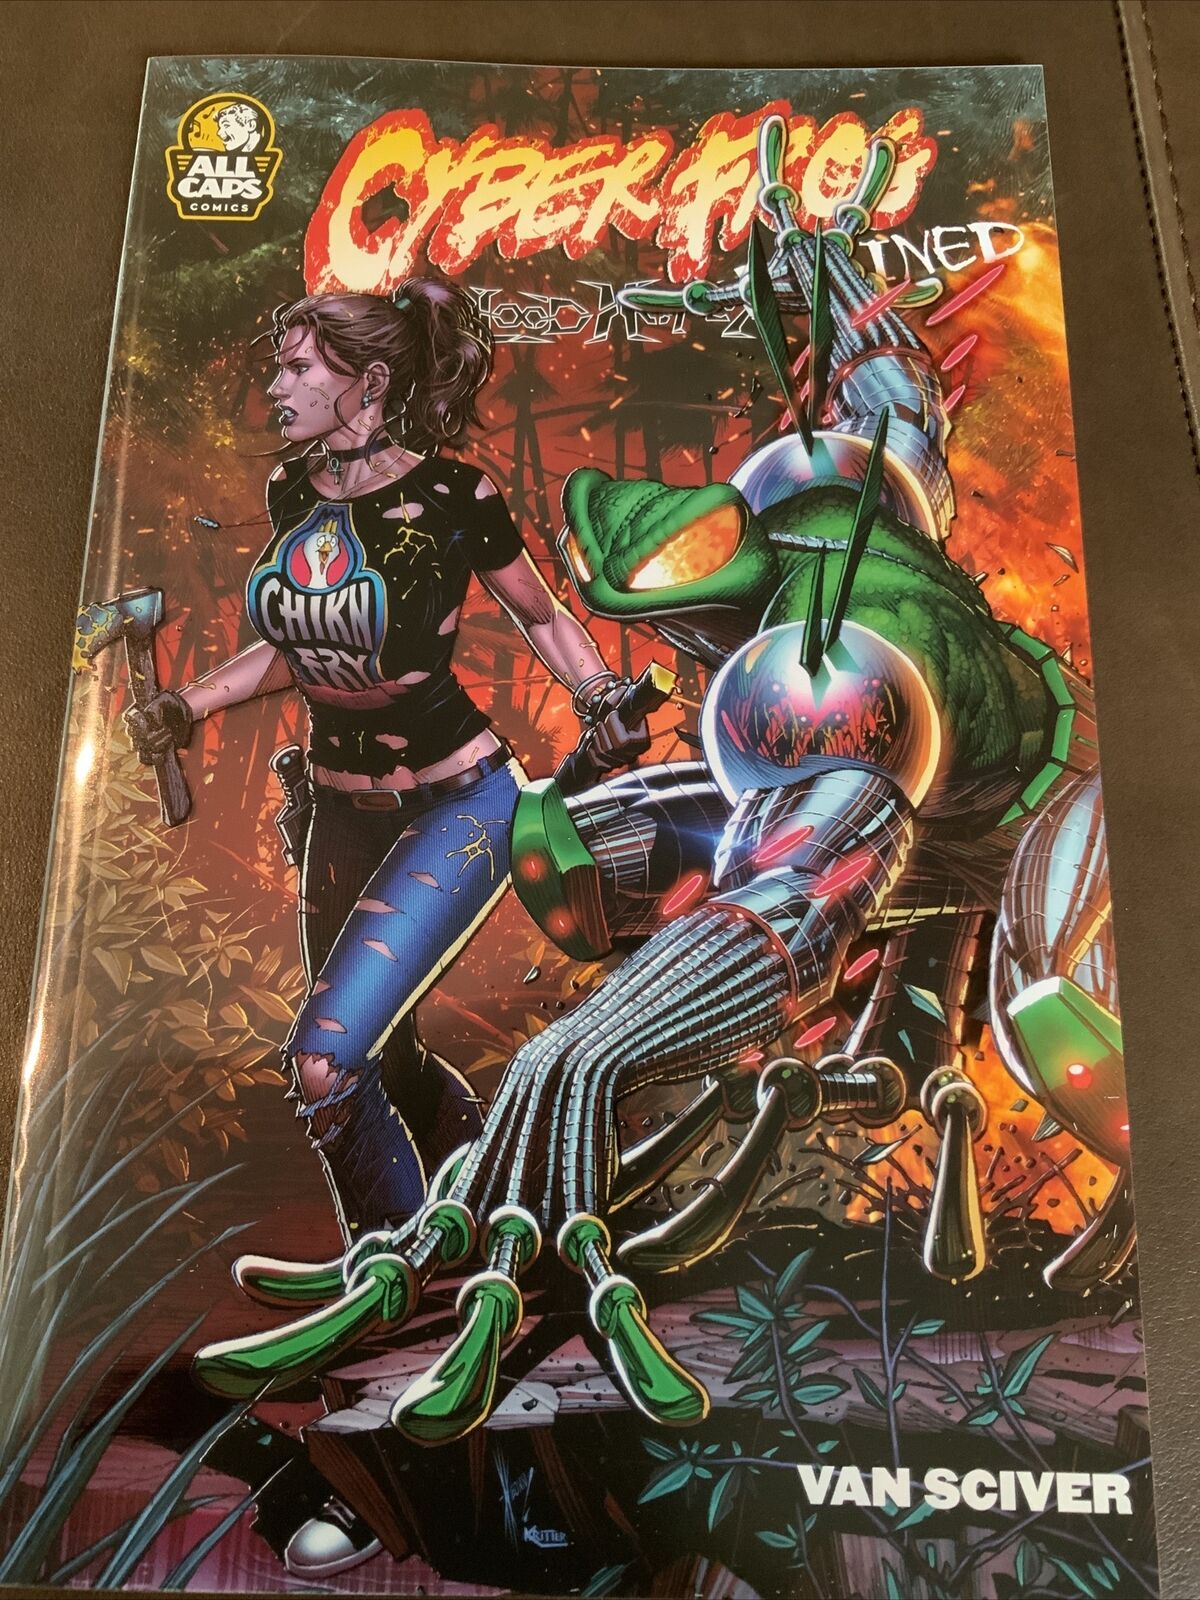 4th SALE CYBERFROG: BLOODHONEY DRAINED FROG & HEATHER EDITION